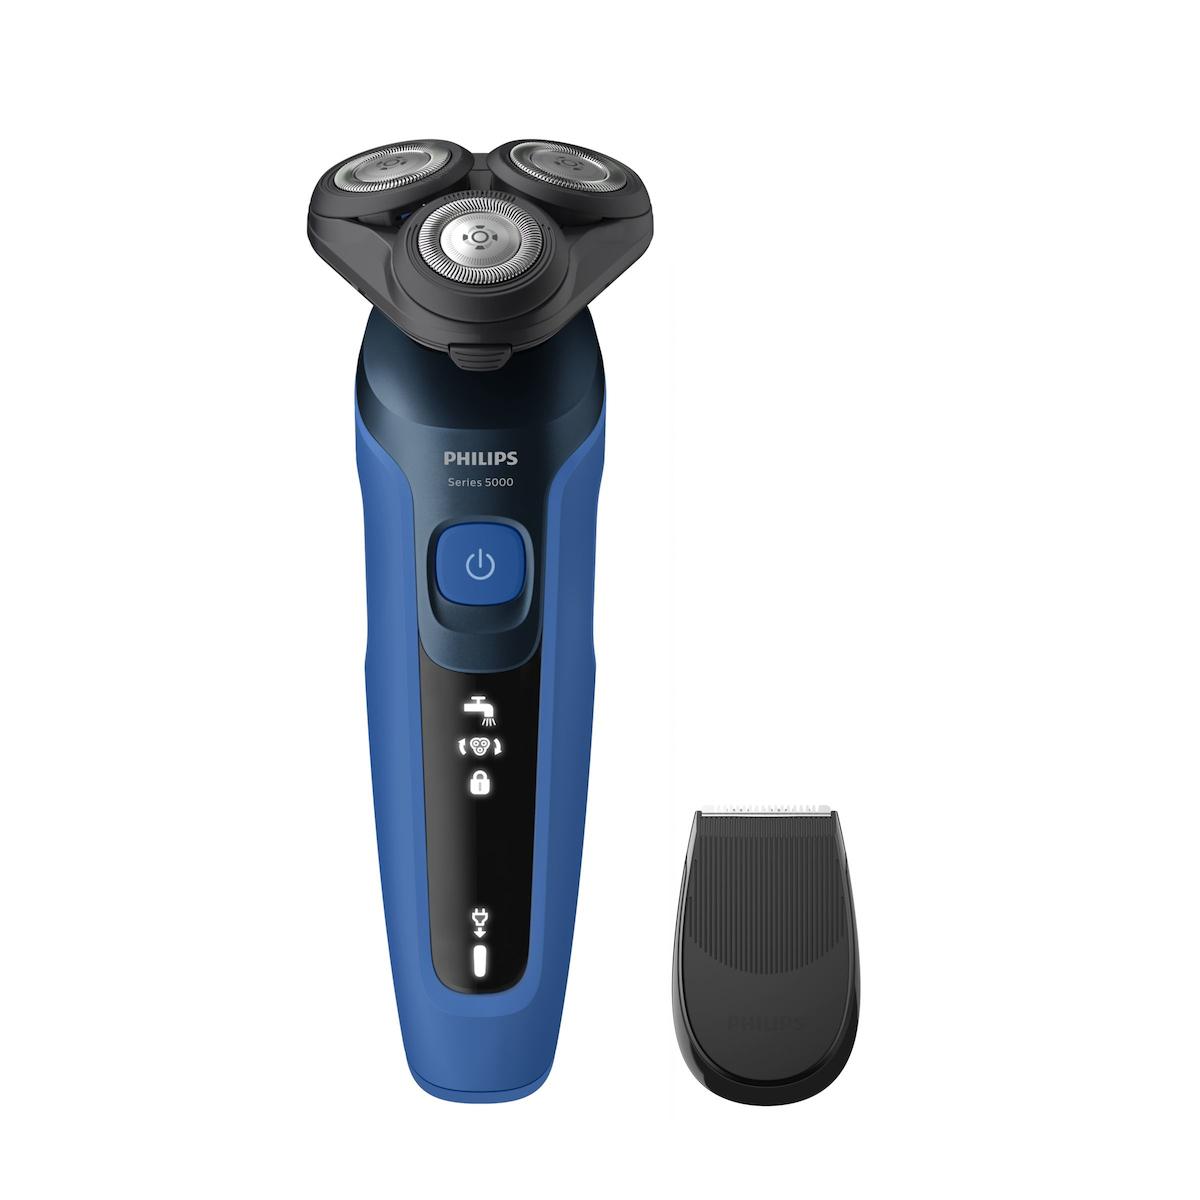 Philips Series 5000 S5466/17 ComfortTech blades Wet and dry electric shaver blue black